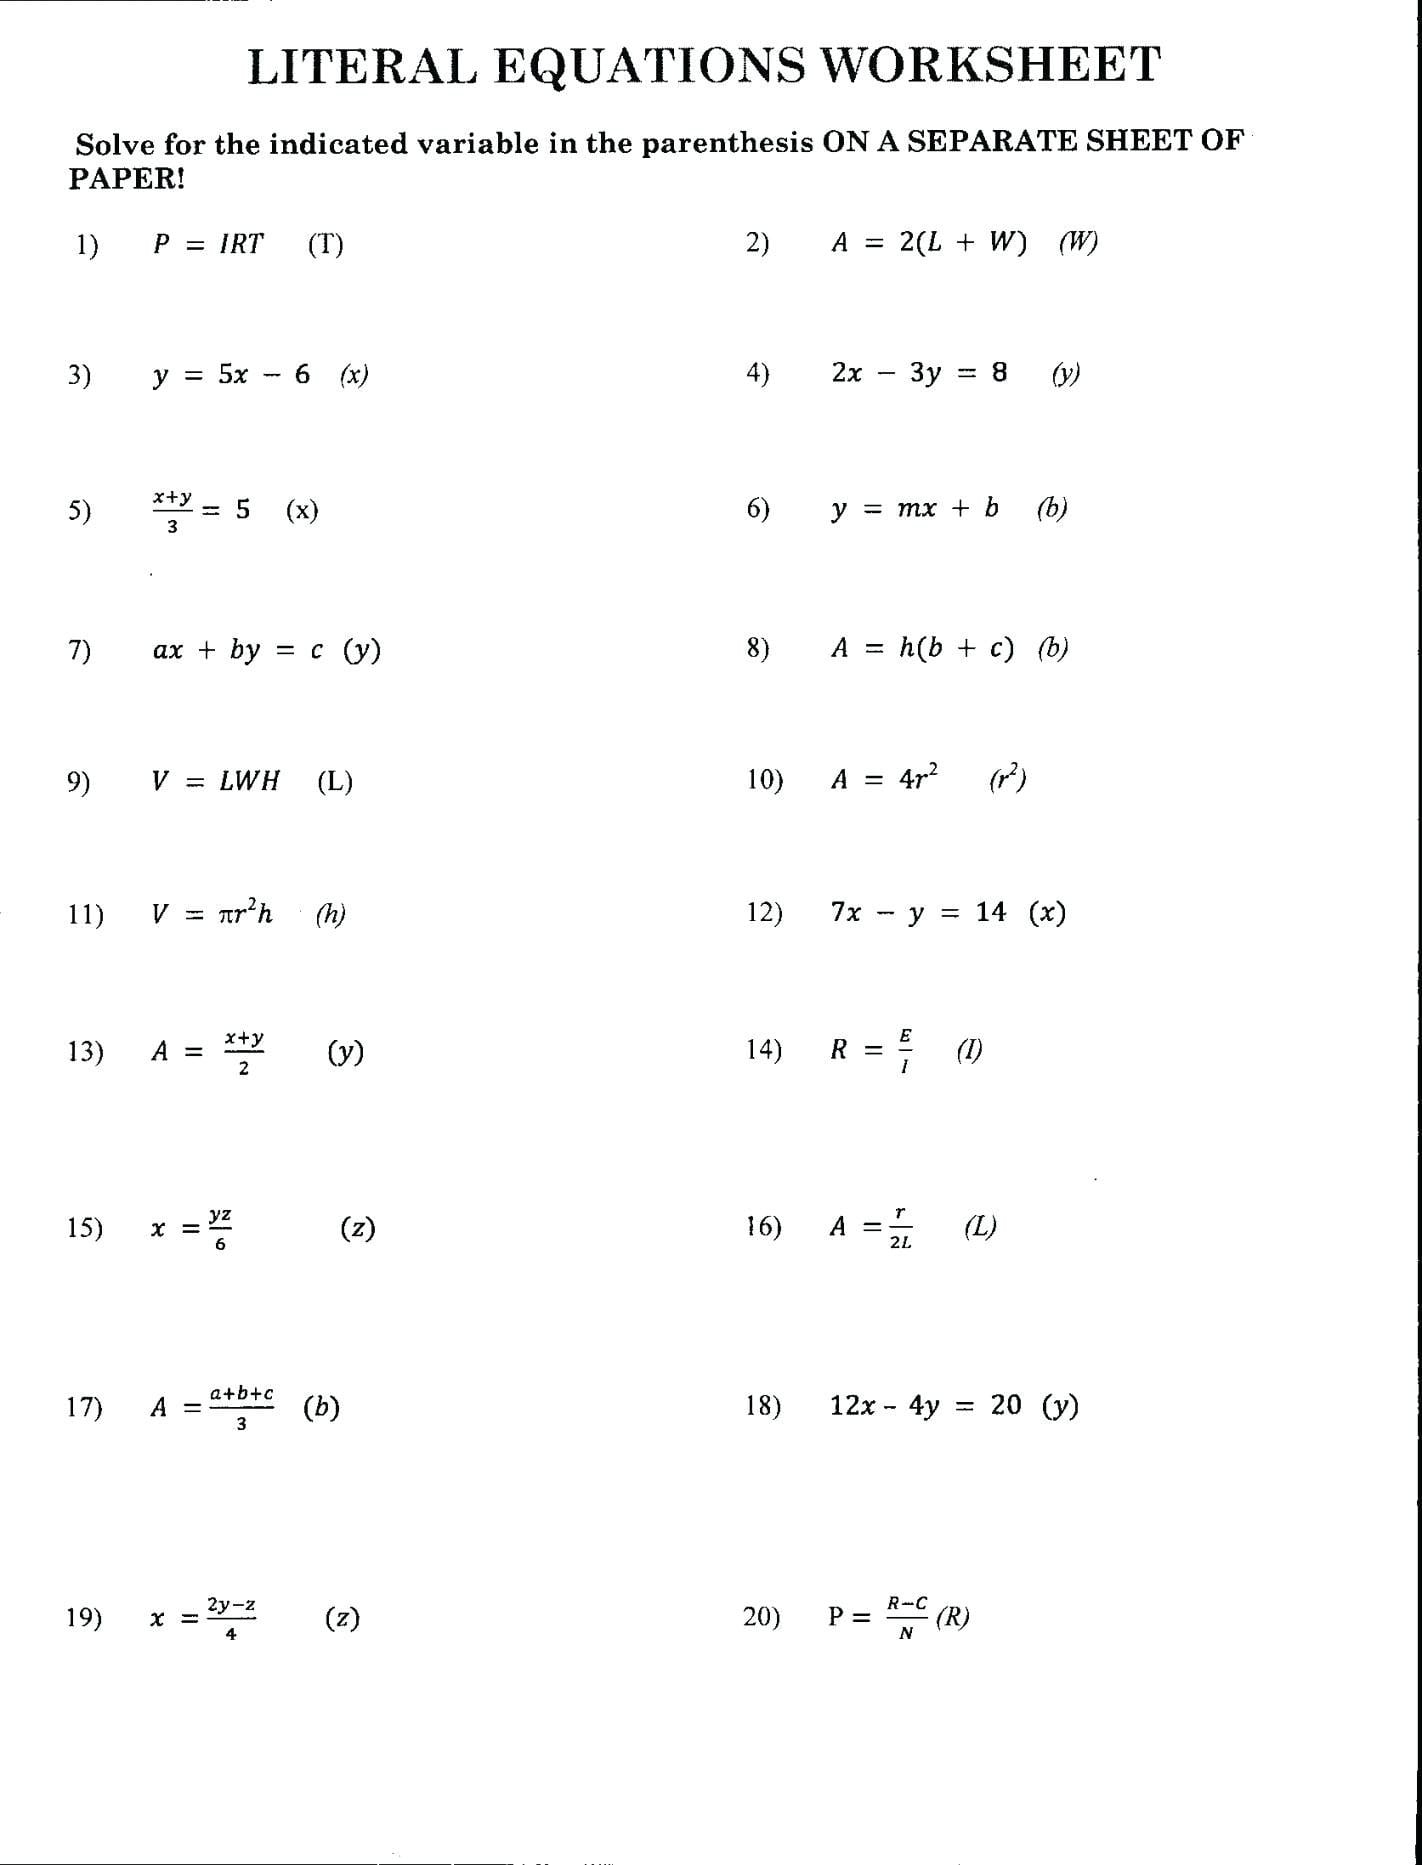 Solving Literal Equations Worksheets Math Solve Literal Equations Or Literal Equations Worksheet Answers